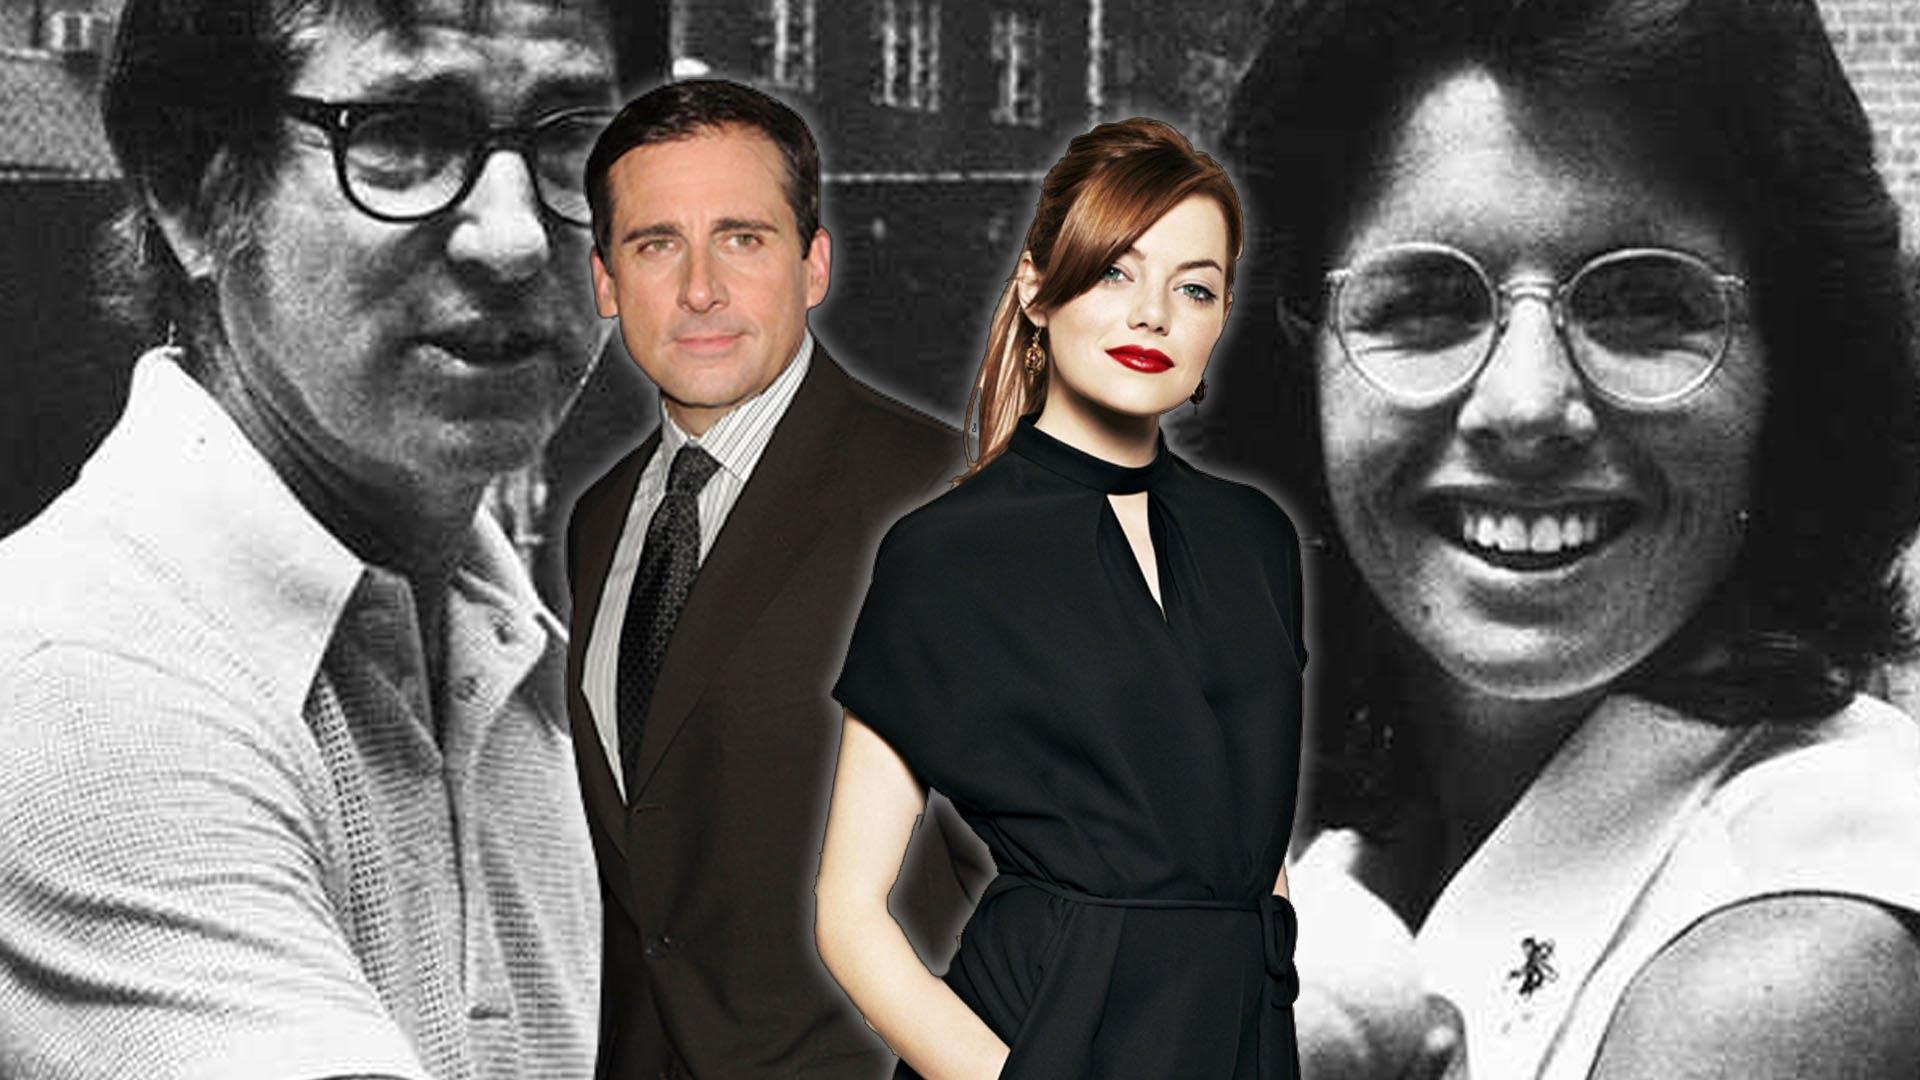 Steve Carell And Emma Stone In BATTLE OF THE SEXES- AMC Movie News